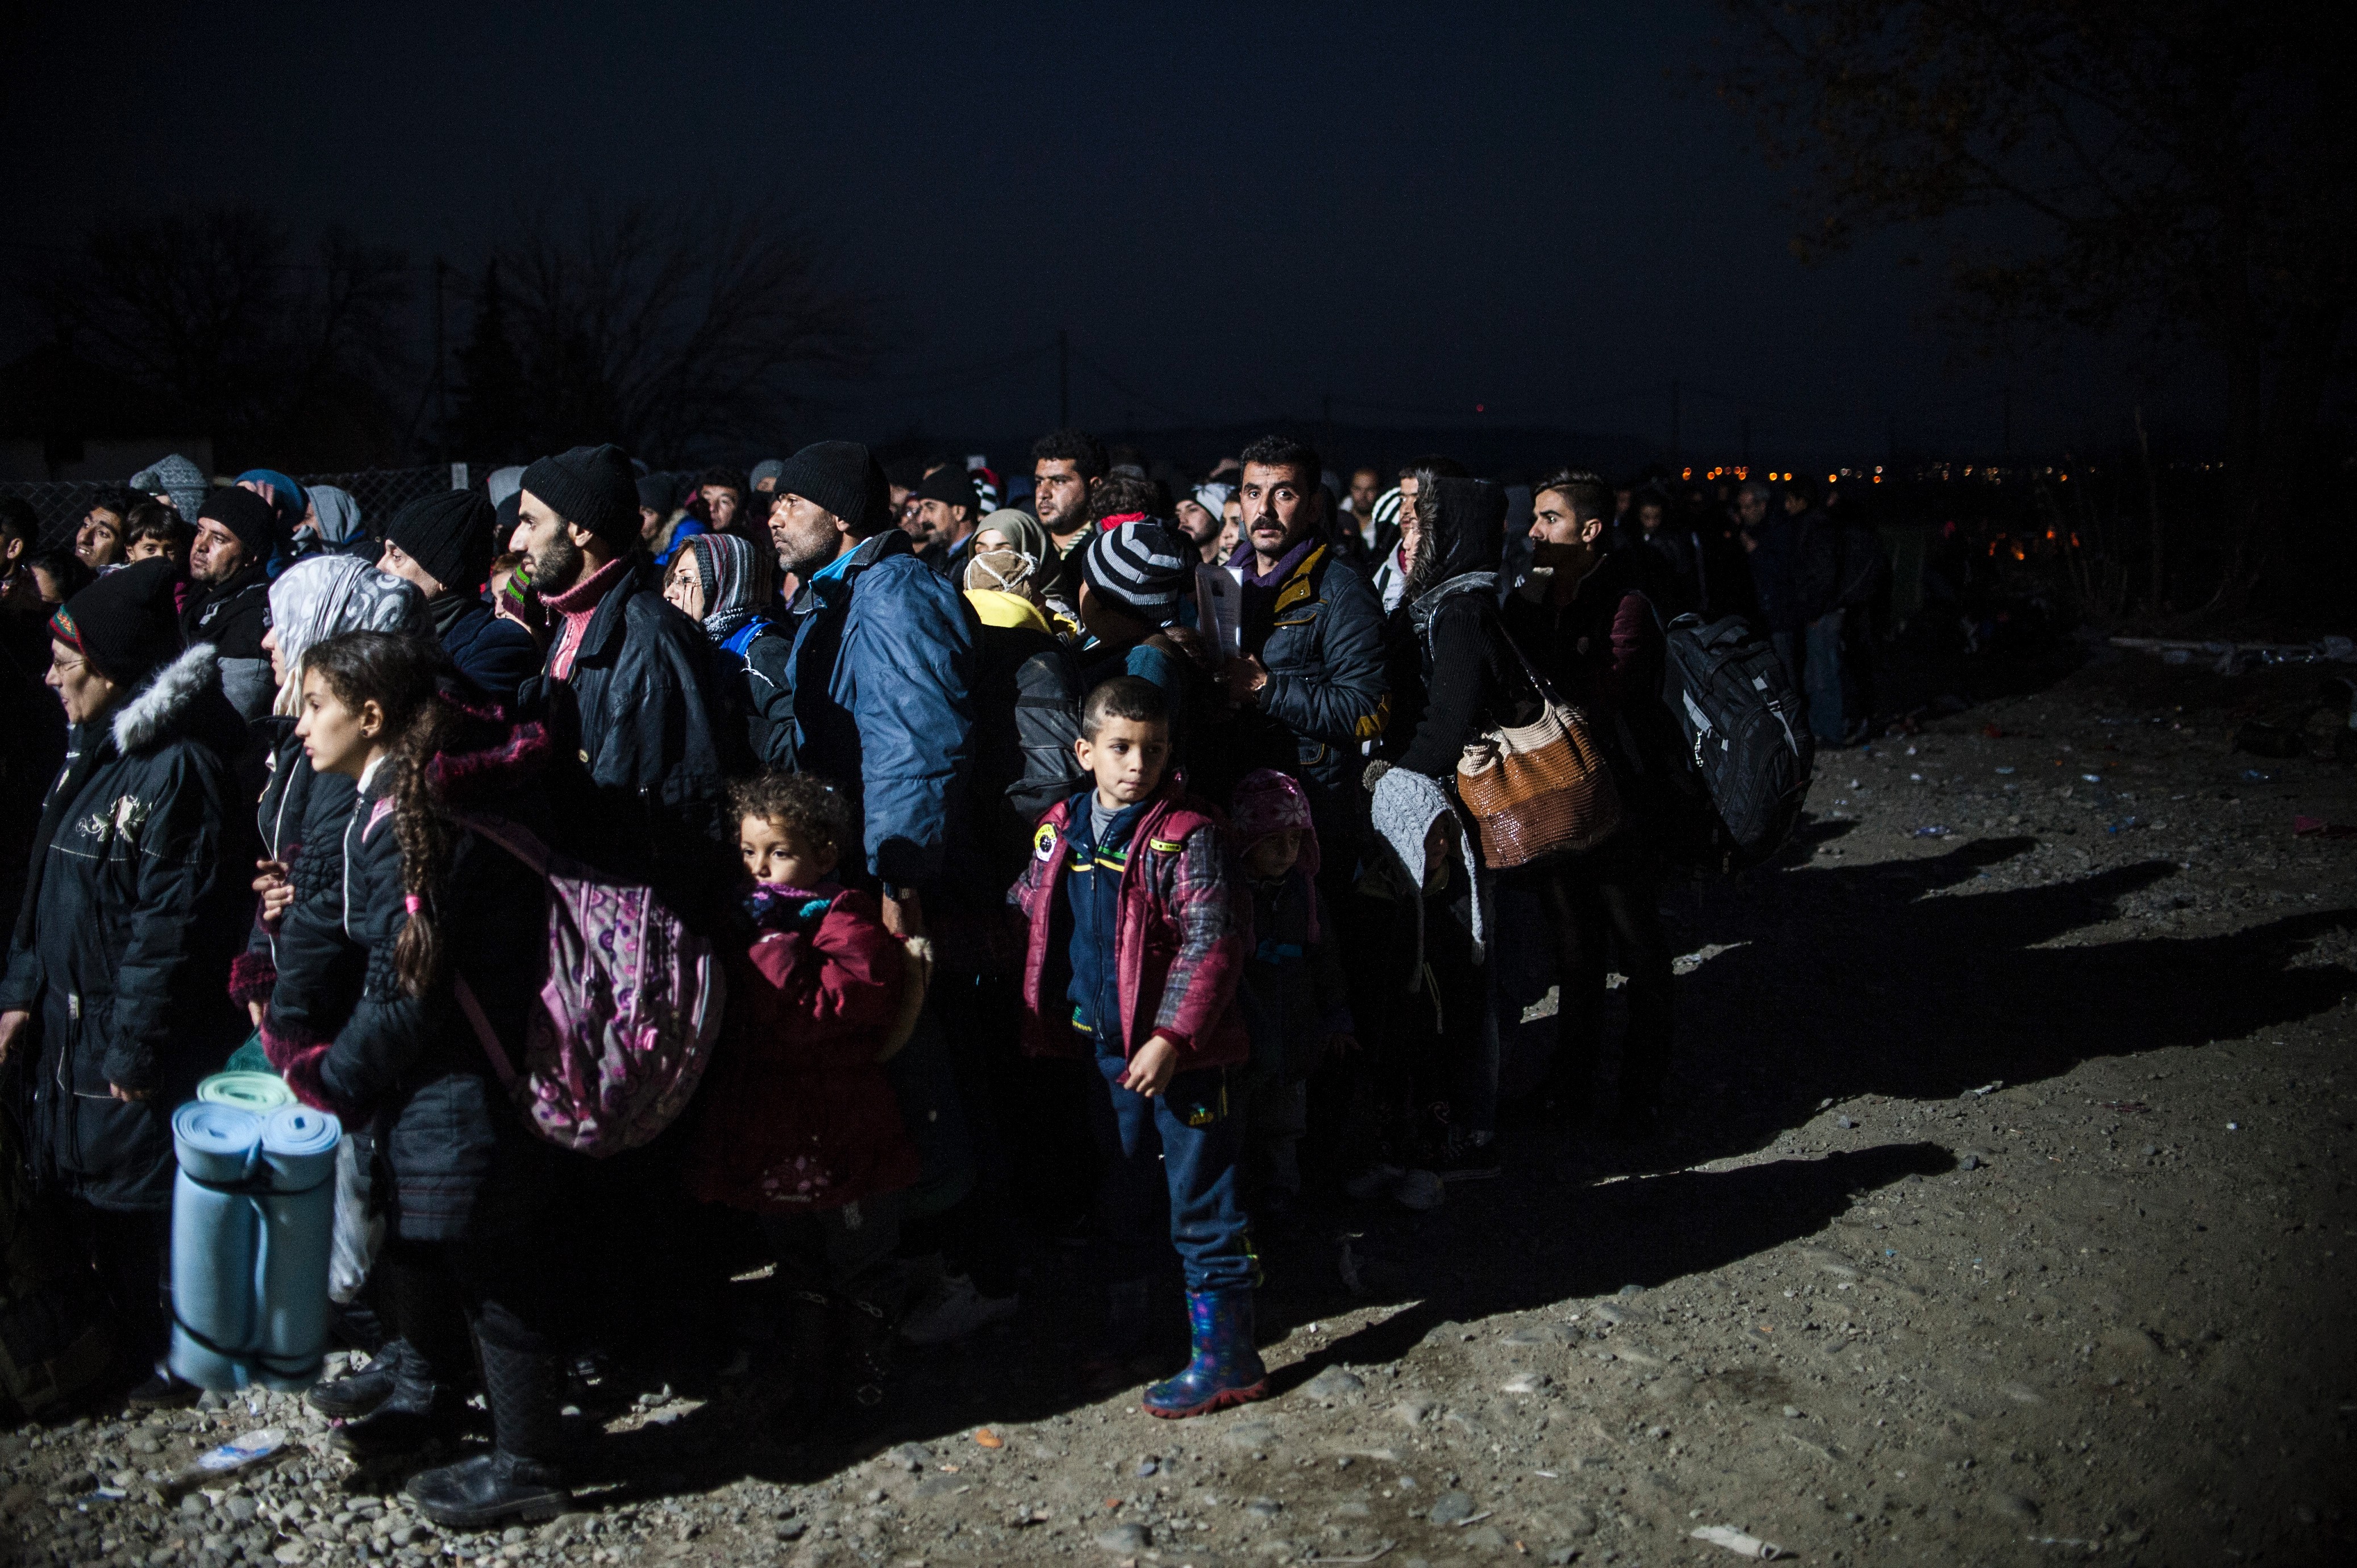 Migrants wait to enter a refugee camp after crossing the Greek-Macedonian border, near Gevgelija, Macedonia, on Dec. 5, 2015 (Armend Nimani—AFP/Getty Images)